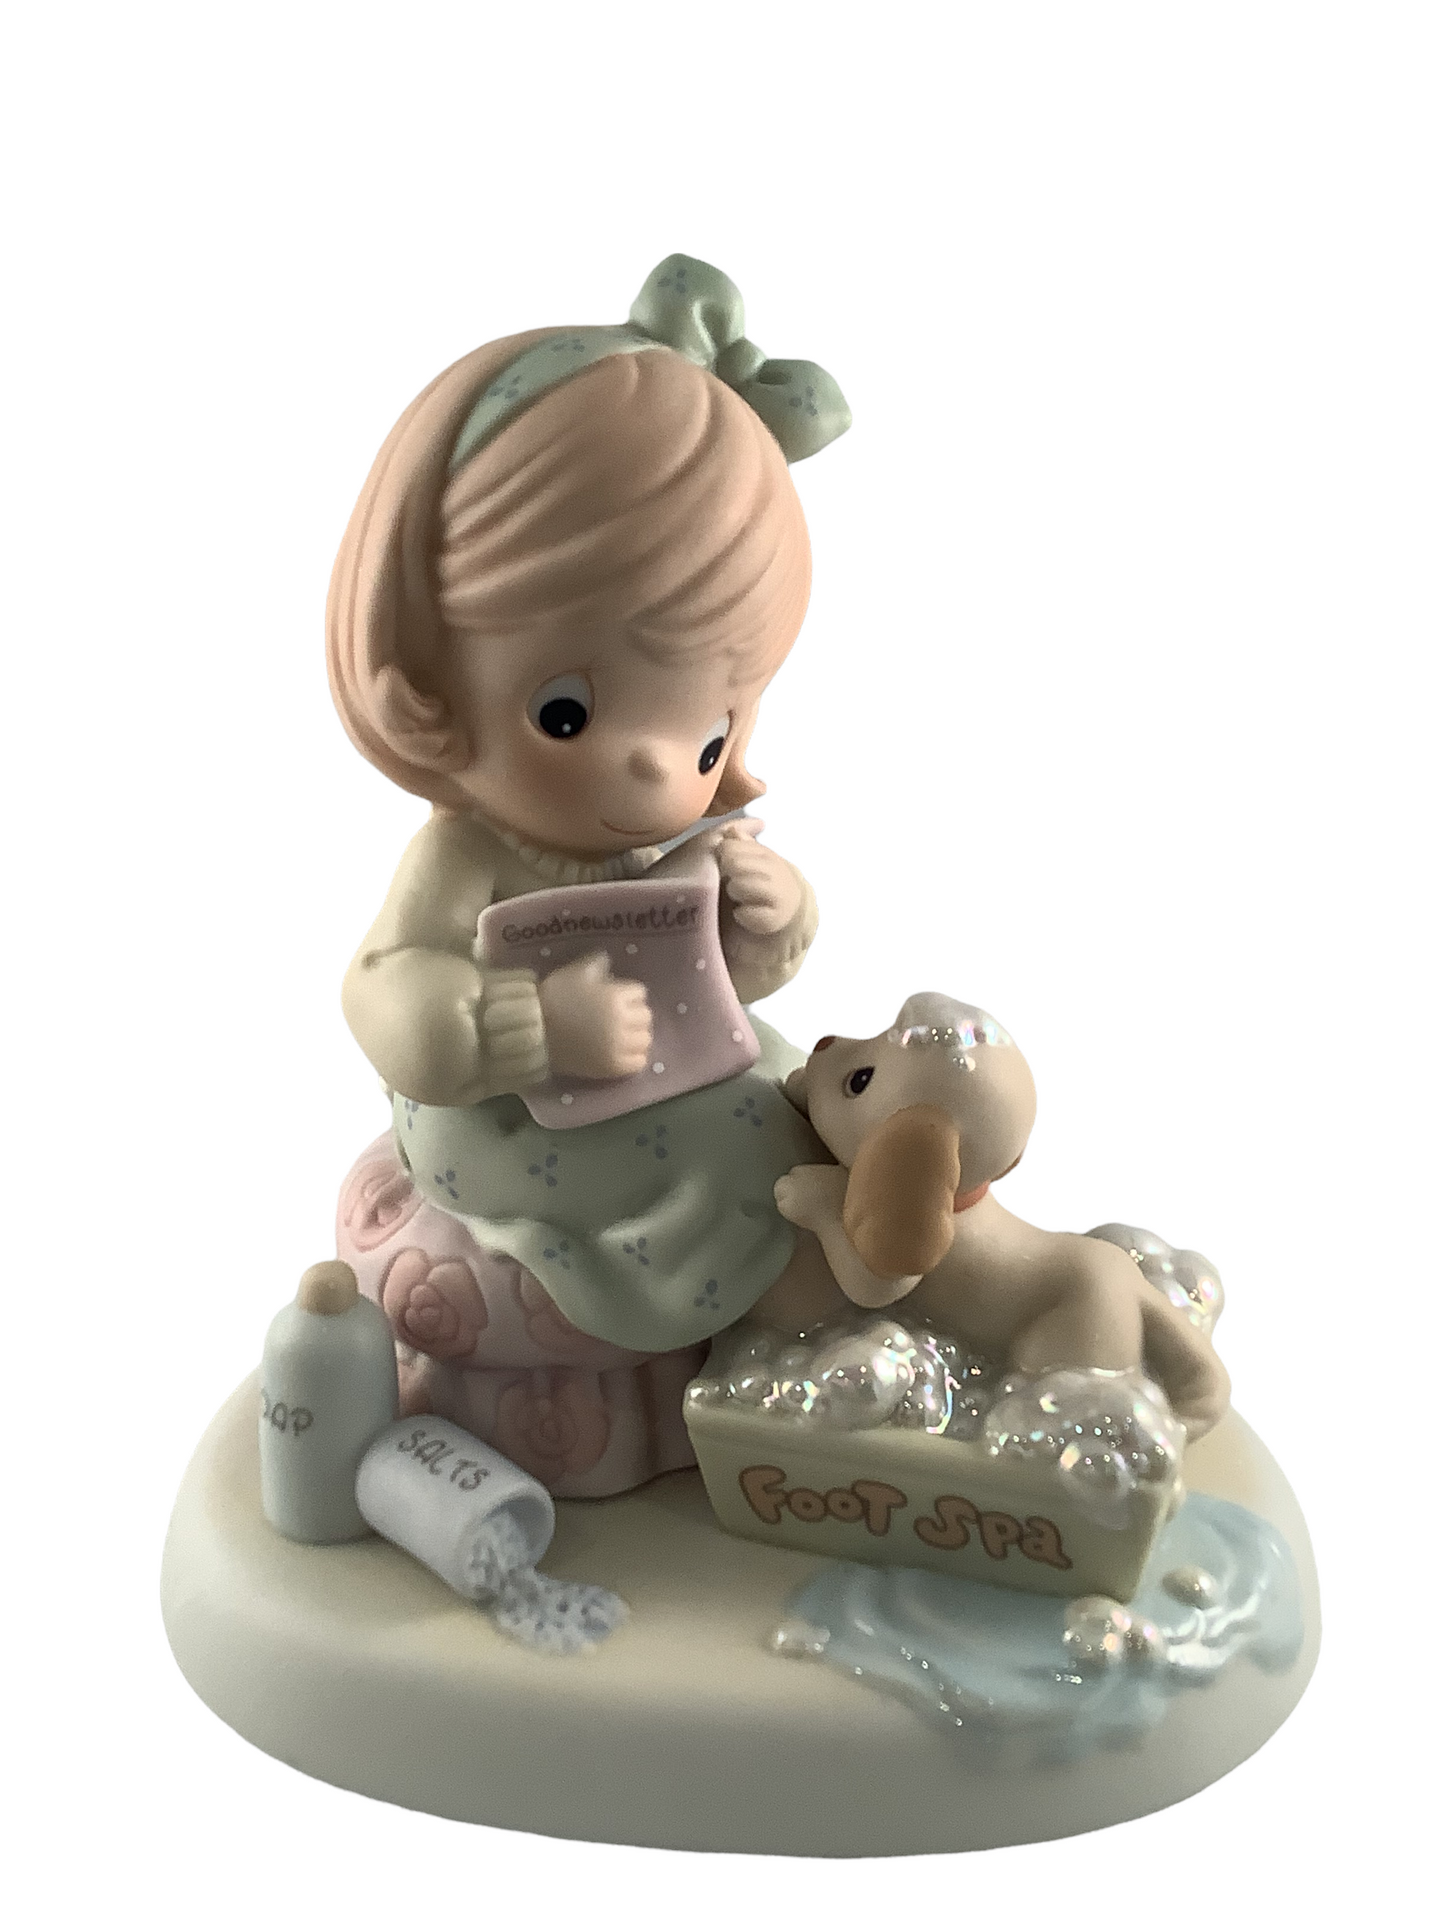 You Are My In-Spa-Ration - Precious Moment Figurine